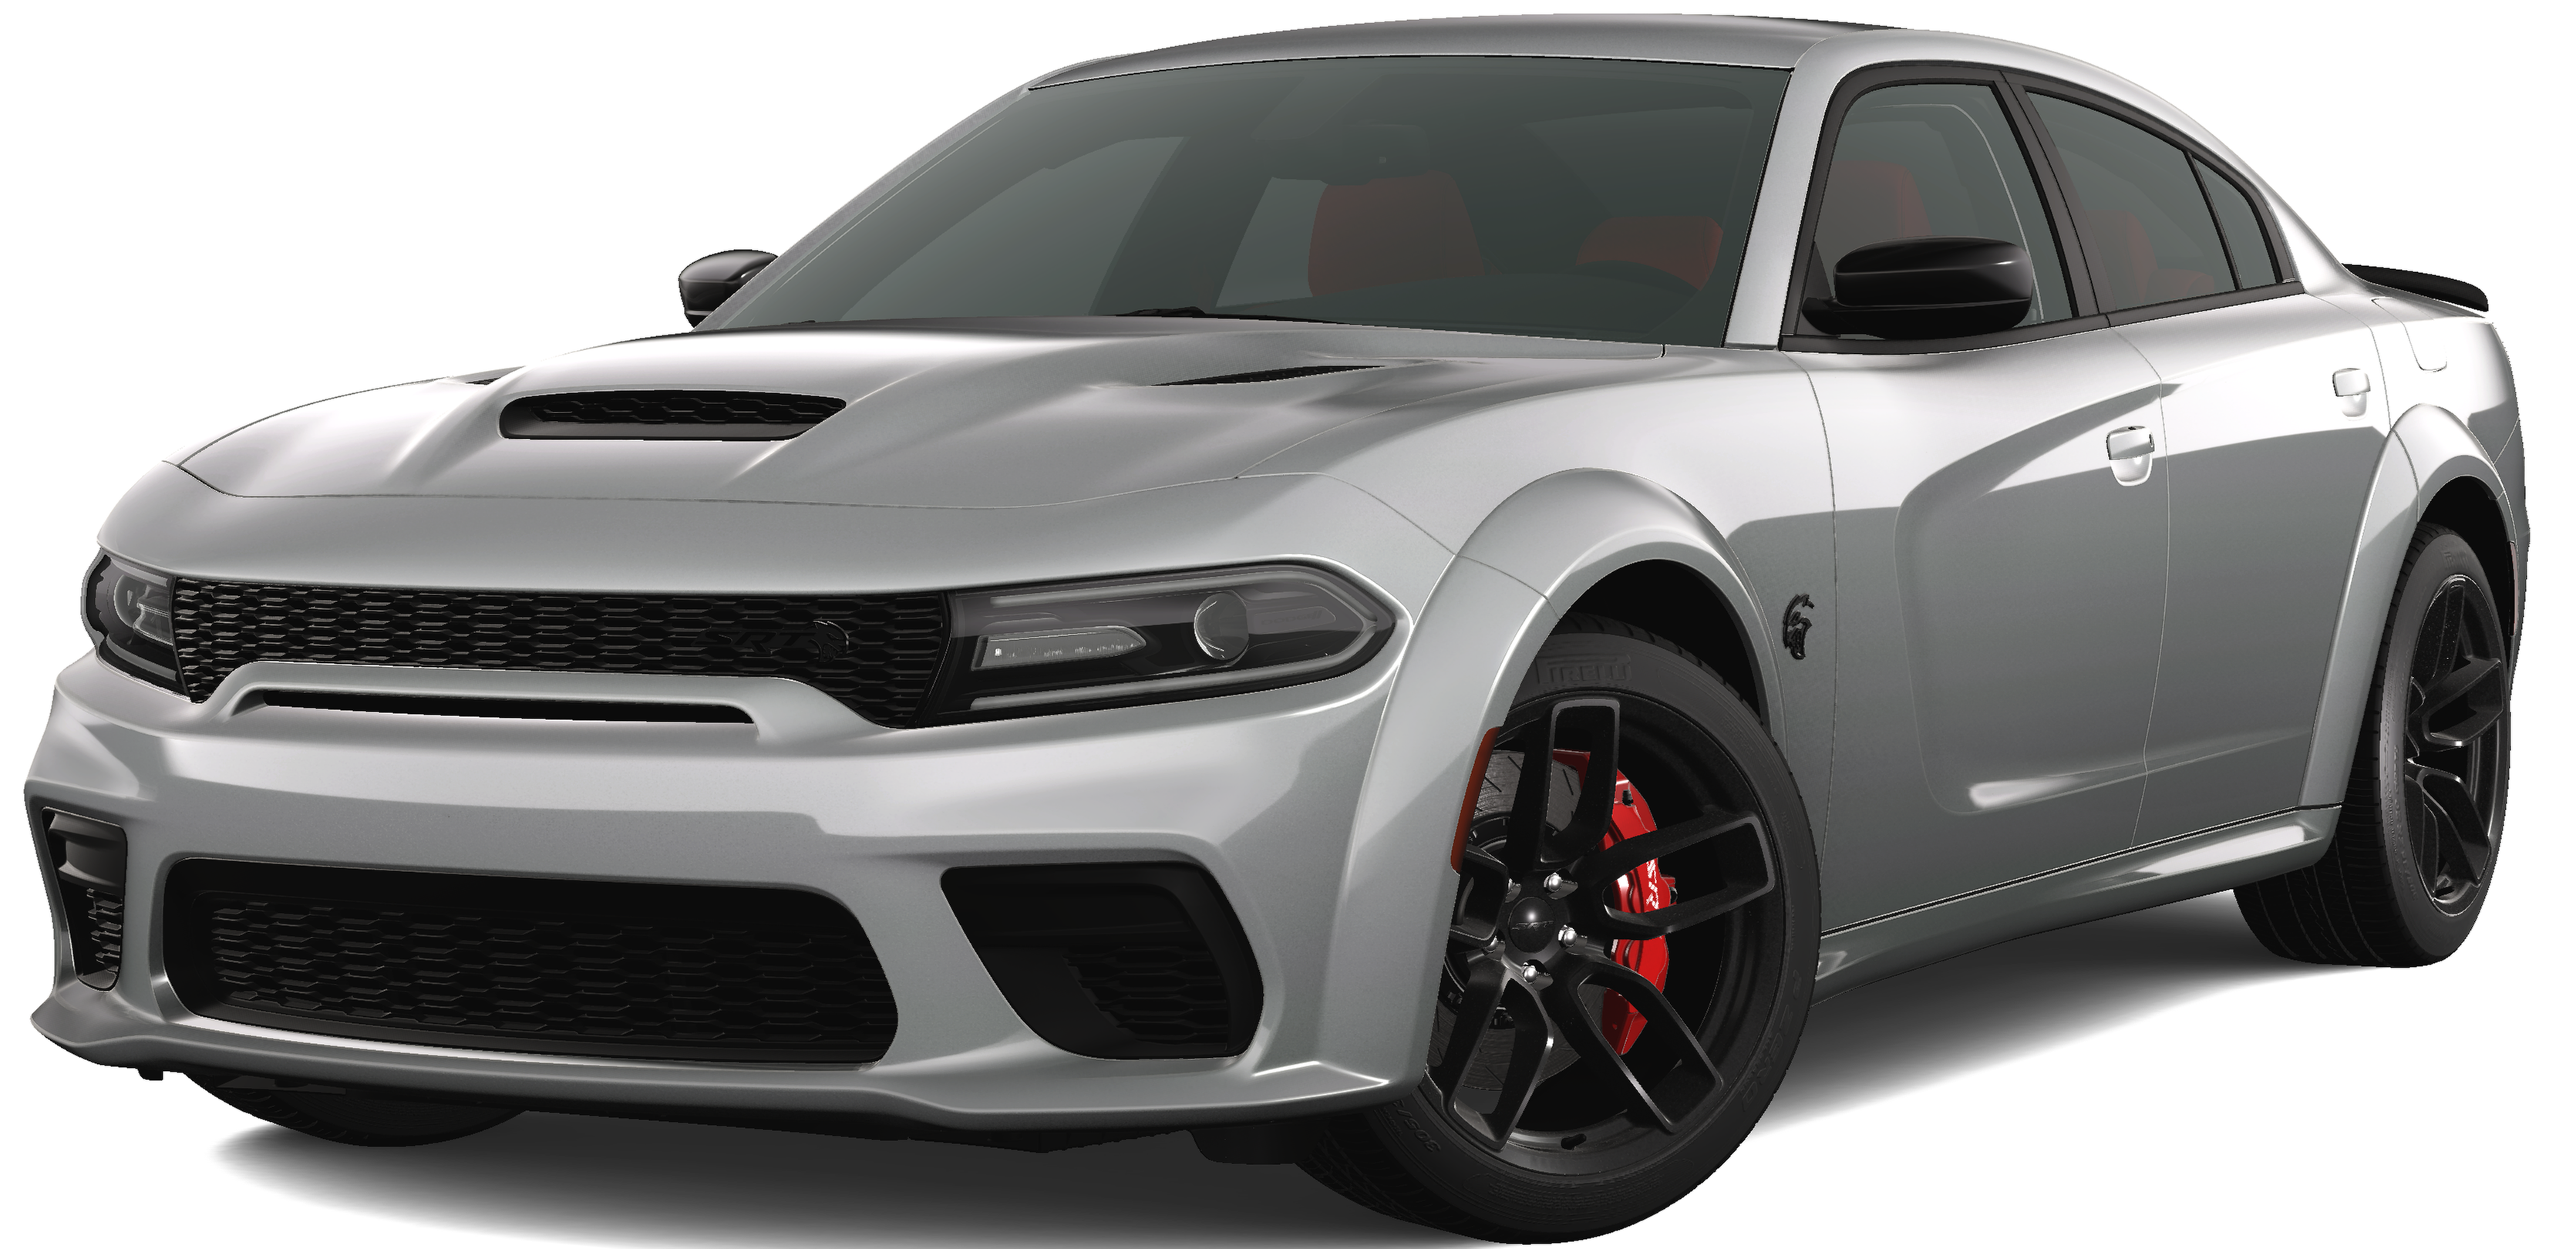 2023 Dodge Charger Srt Hellcat 0 60 Release Date